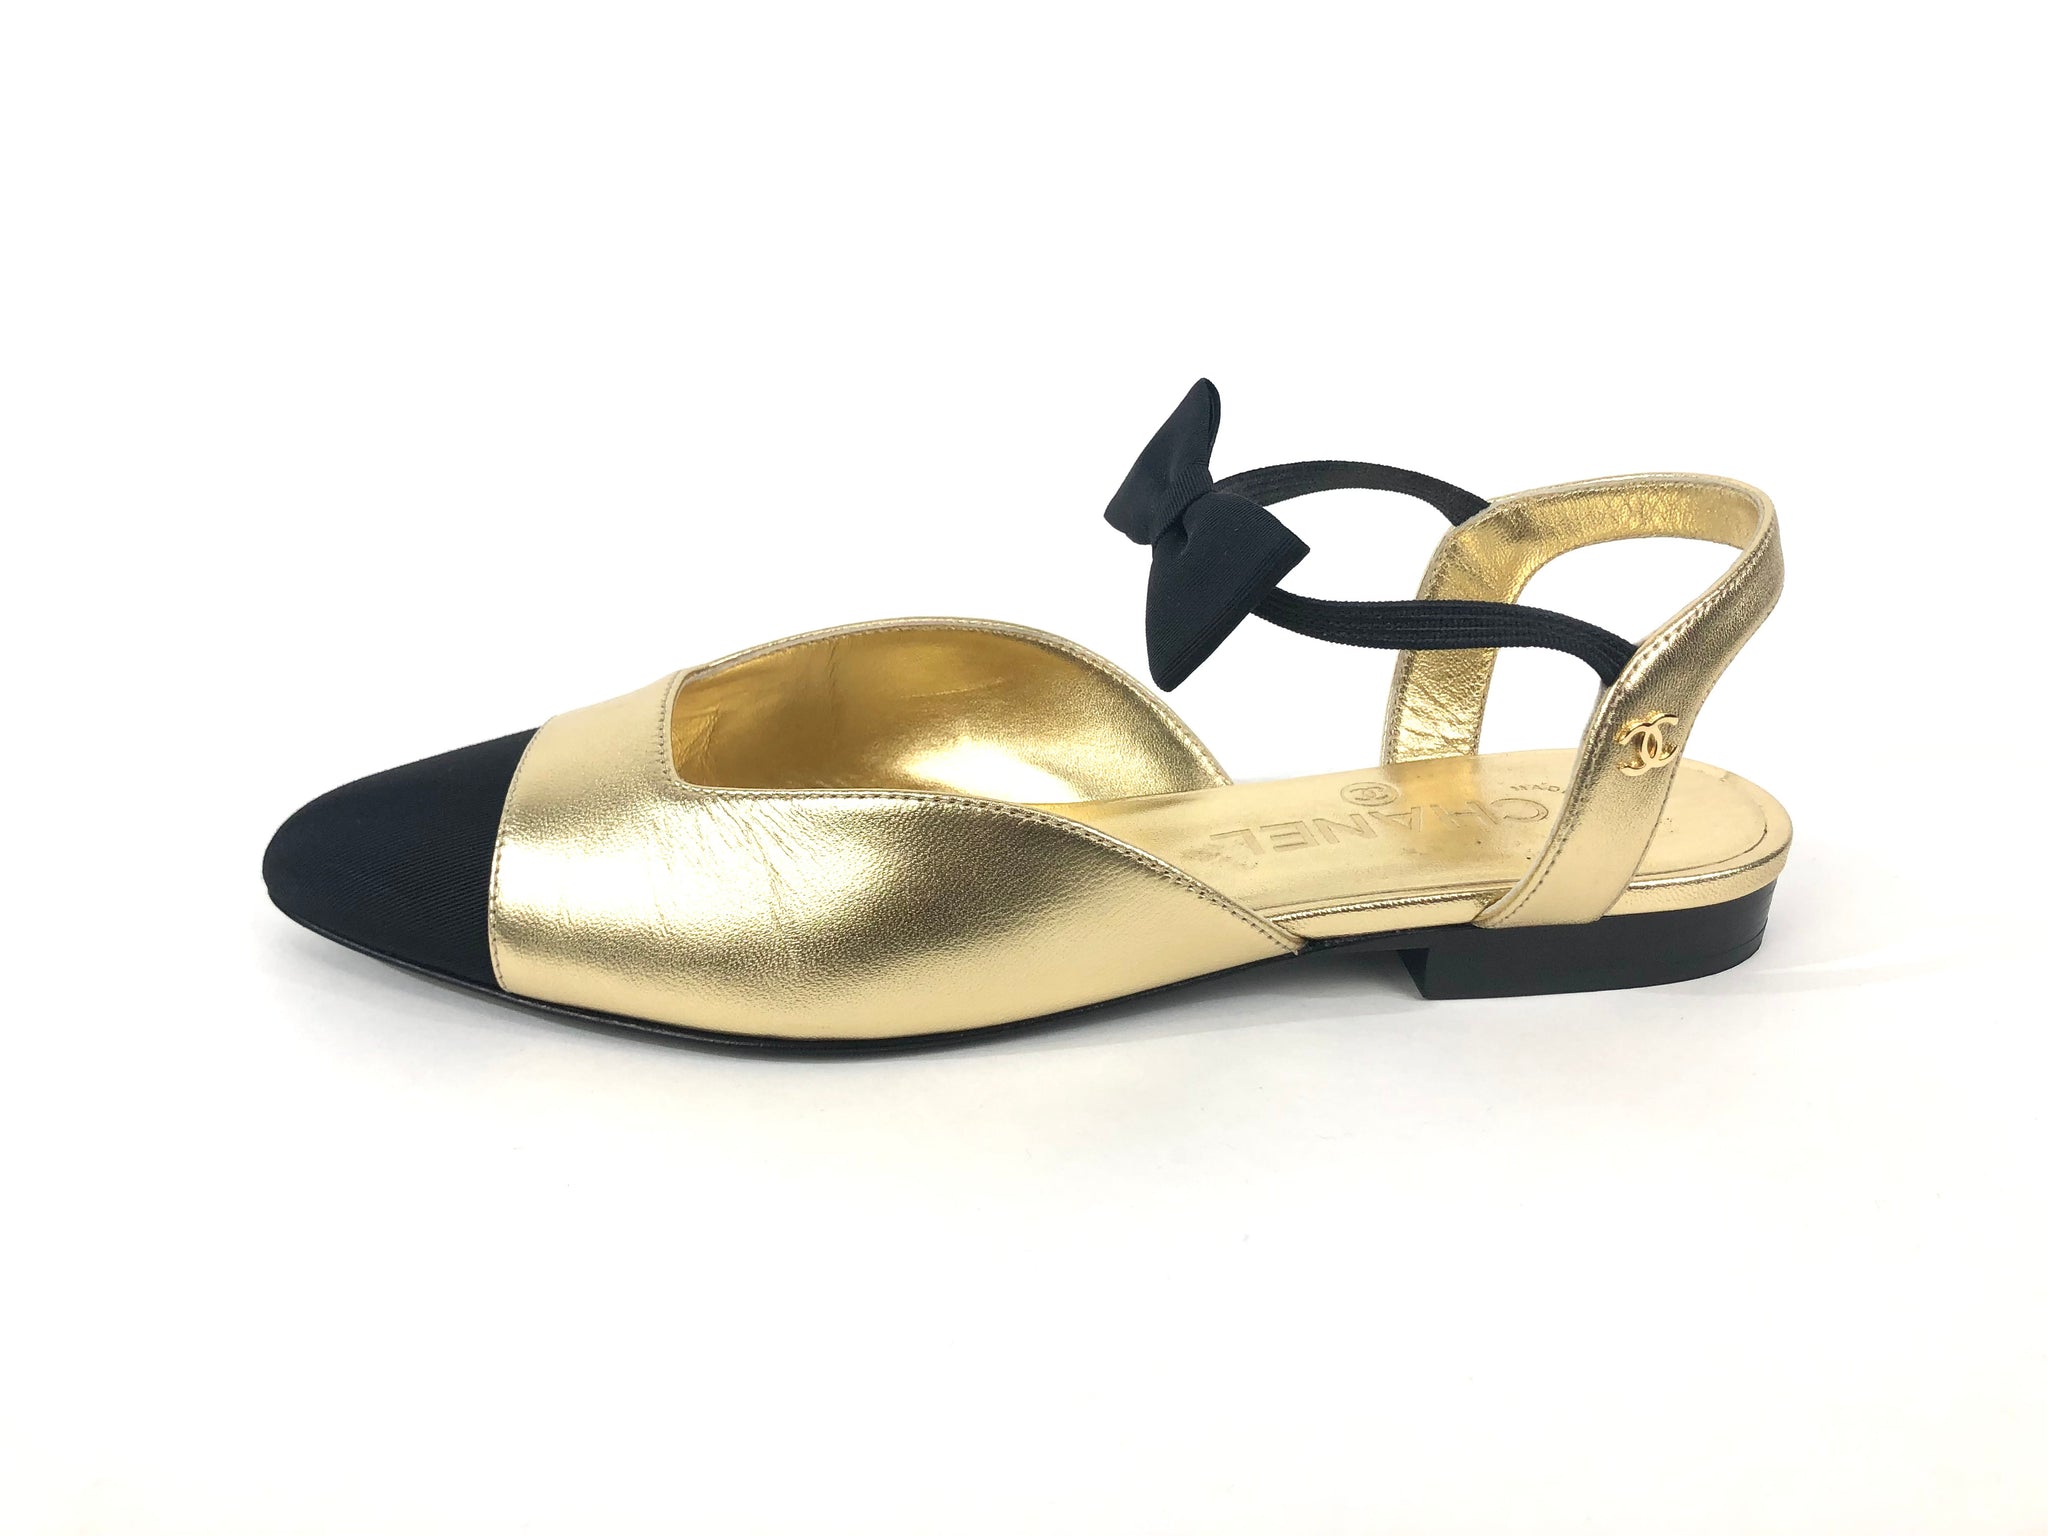 Black and Gold Bow Mary Jane Slingback Flats